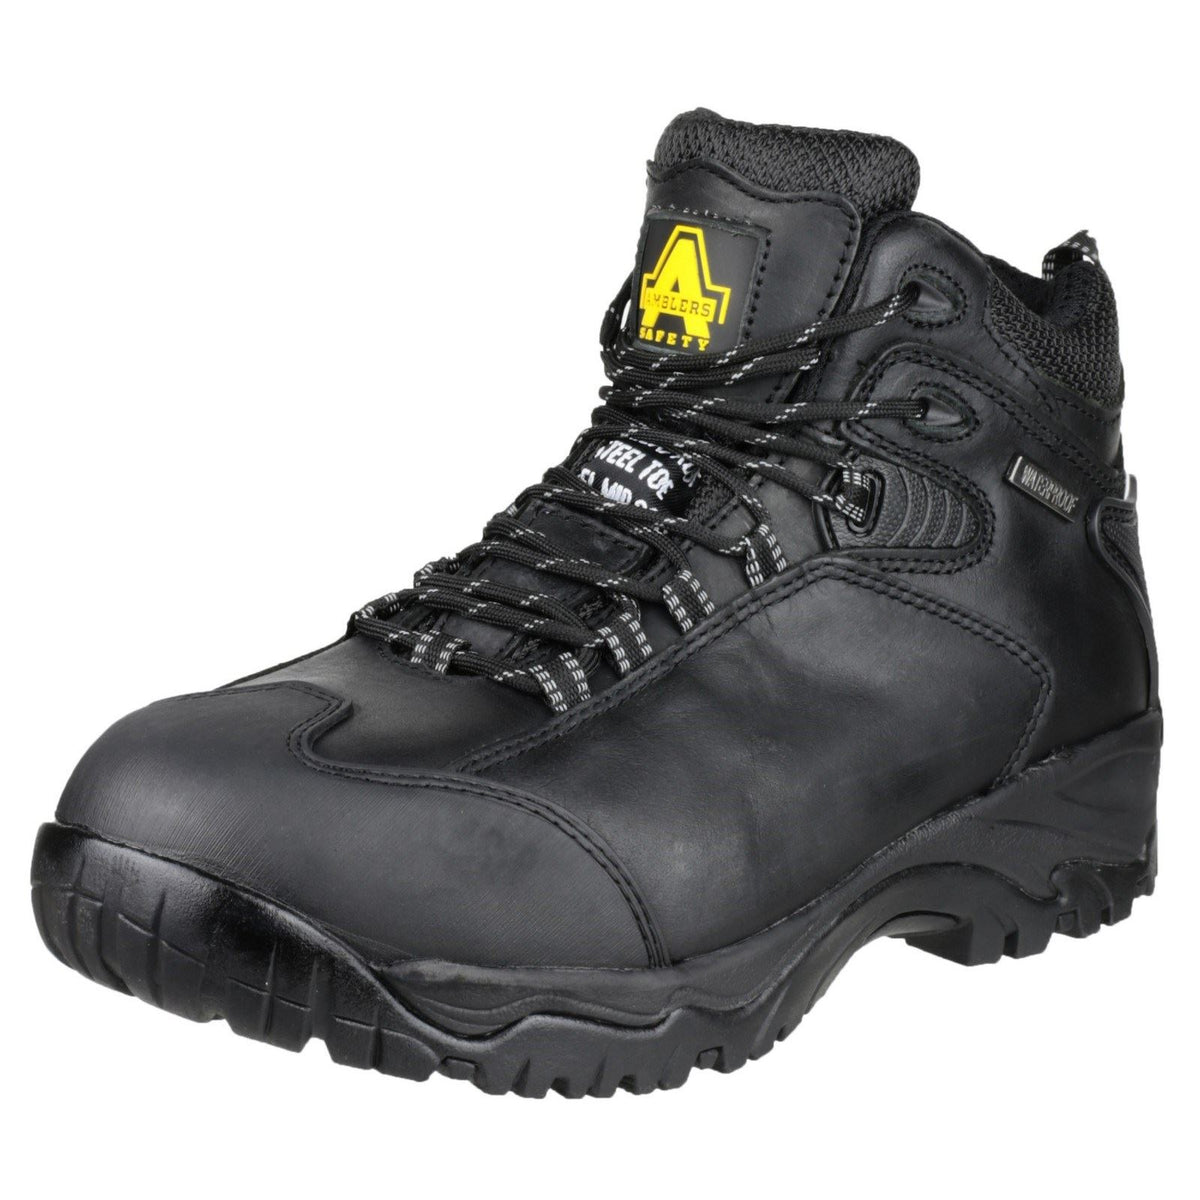 Amblers Safety FS190N Hiker Boots Safety Boots